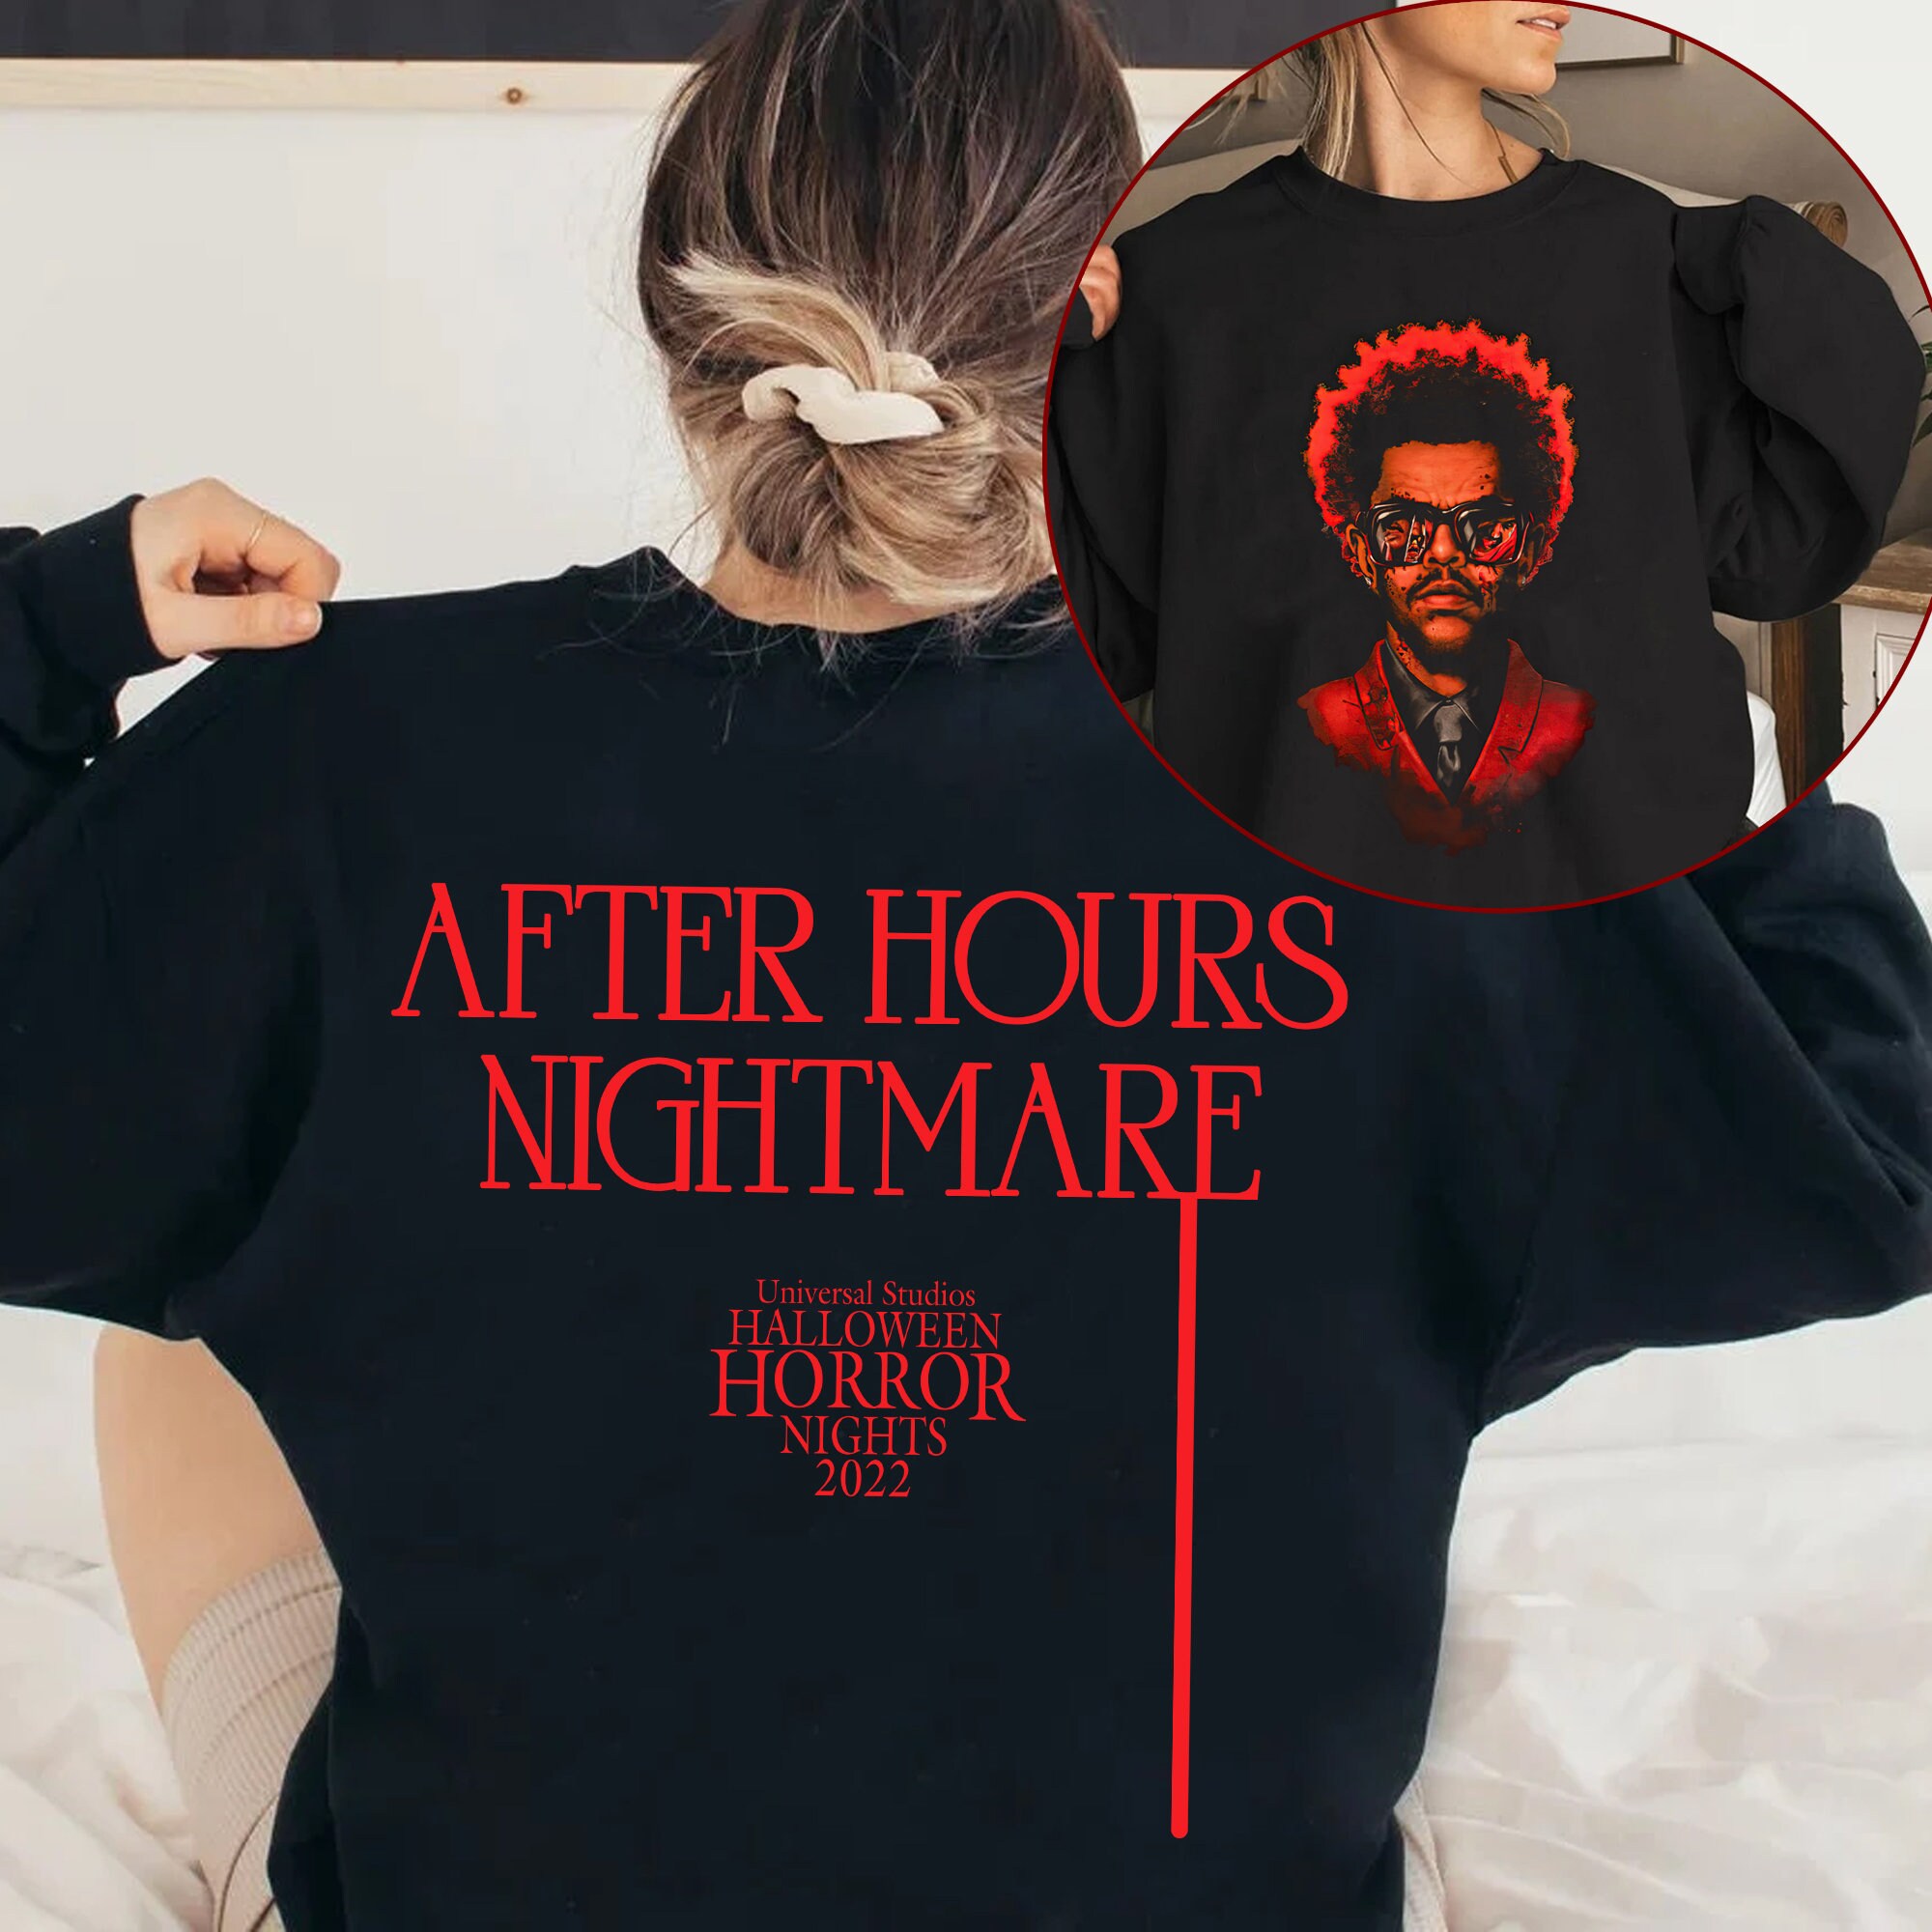 Discover Halloween Horror Nights 2022 The Weeknd Shirt, Weeknd Halloween Horror Nights Shirt, HHN 2022 Shirt, After Hours Nightmare Shirt